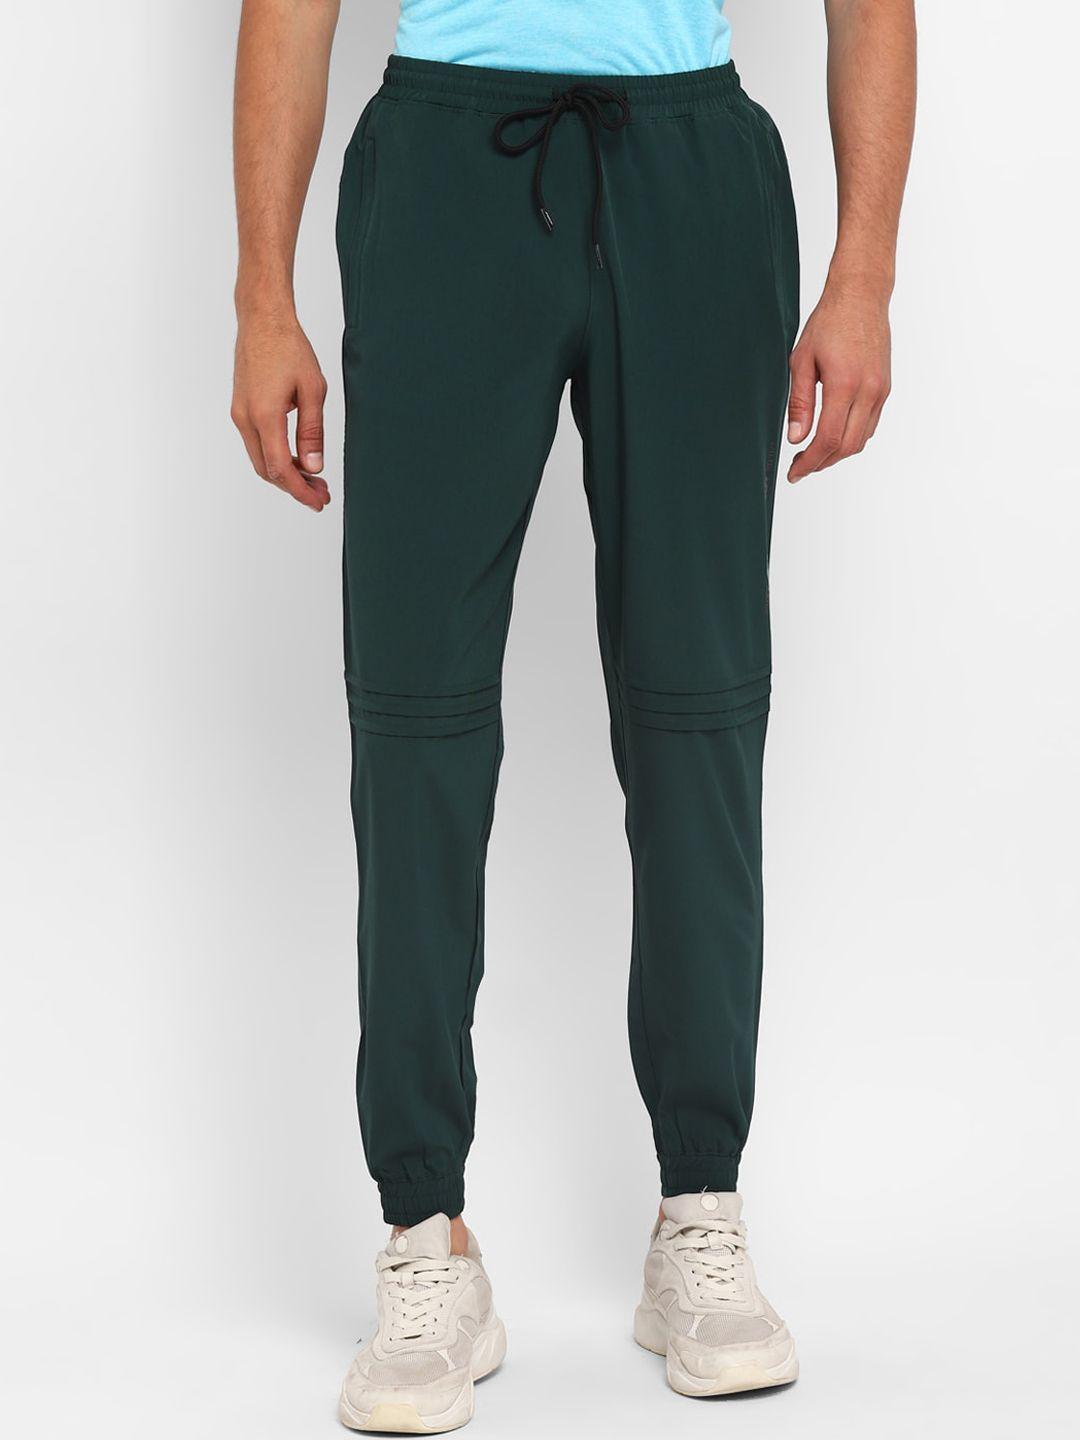 furo-by-red-chief-men-regular-fit-mid-rise-joggers